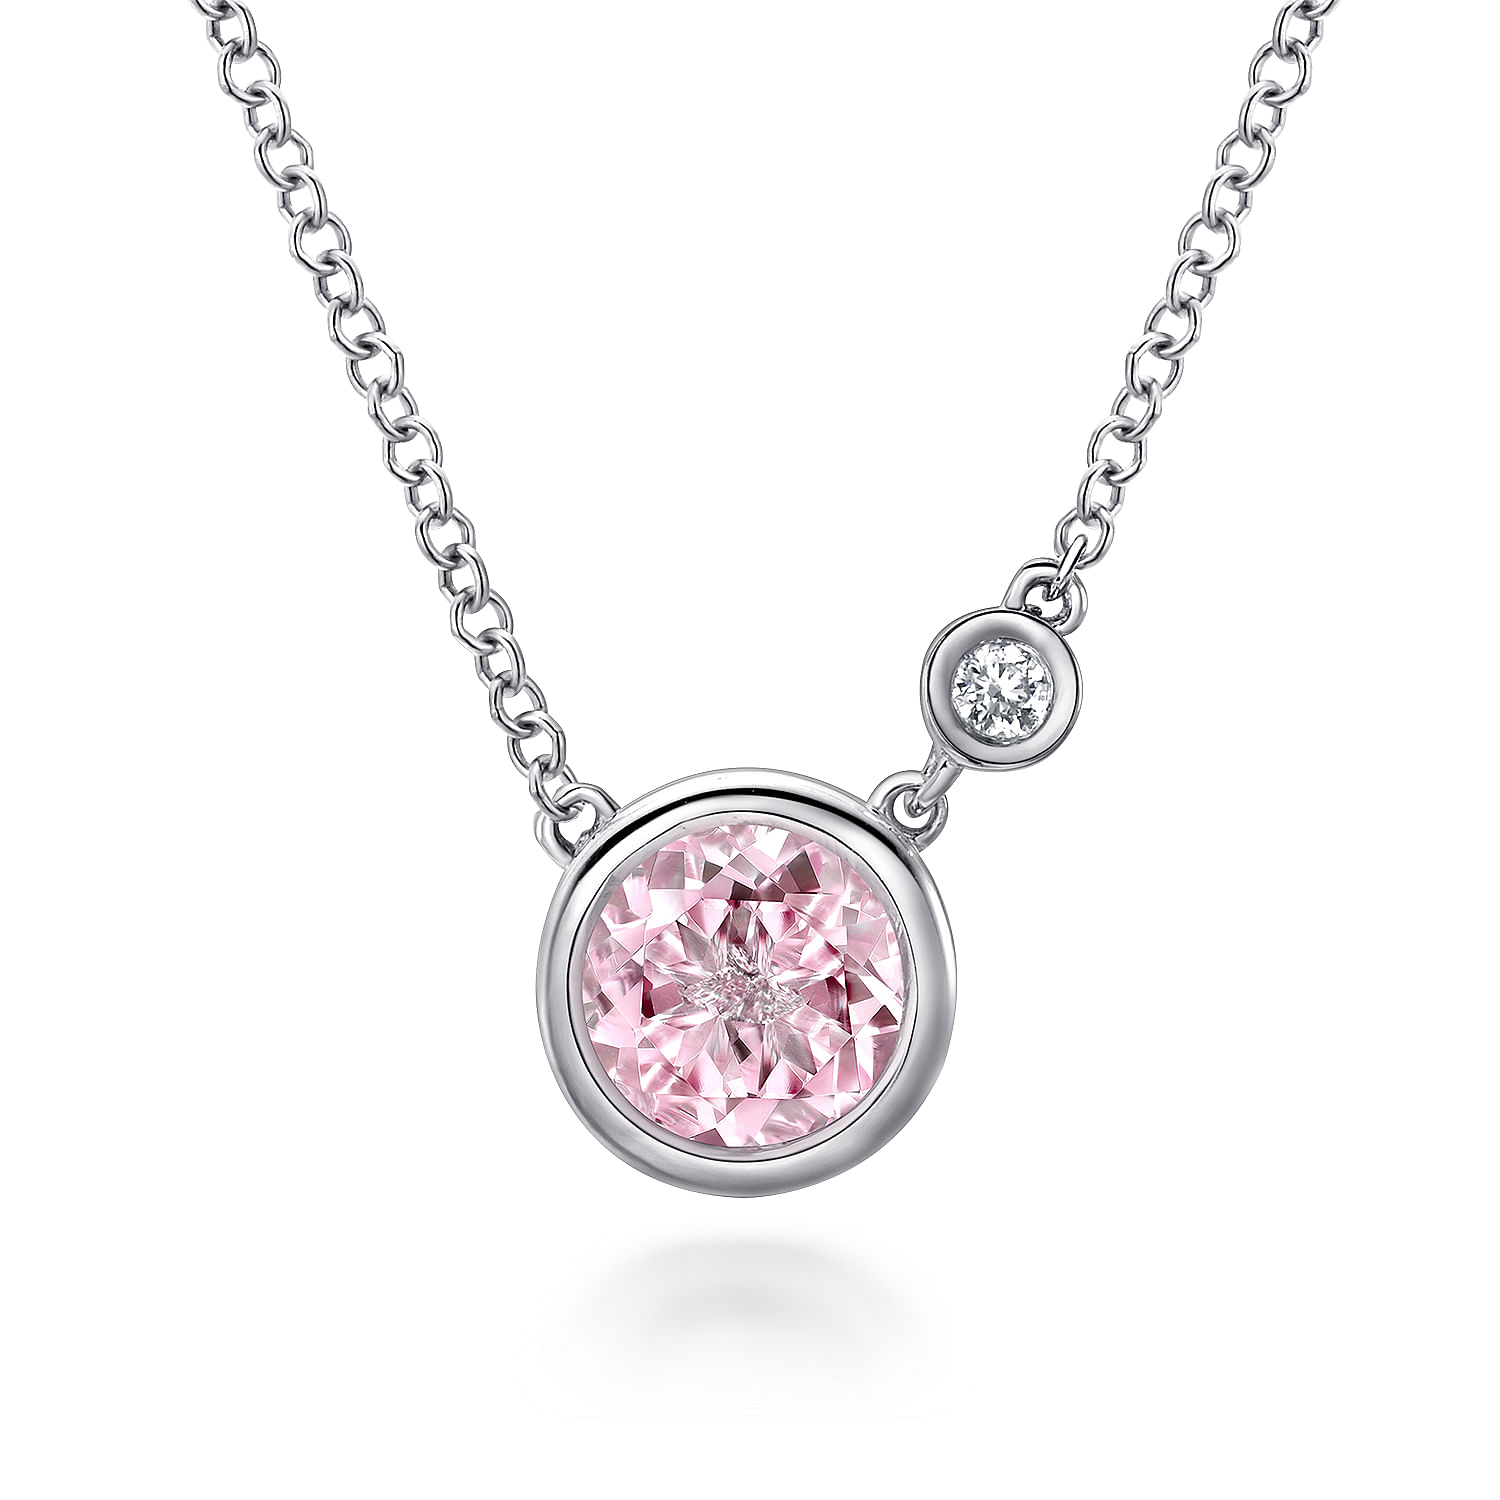 Gabriel - 925 Sterling Silver Pink Zircon and Diamond Pendant Necklace